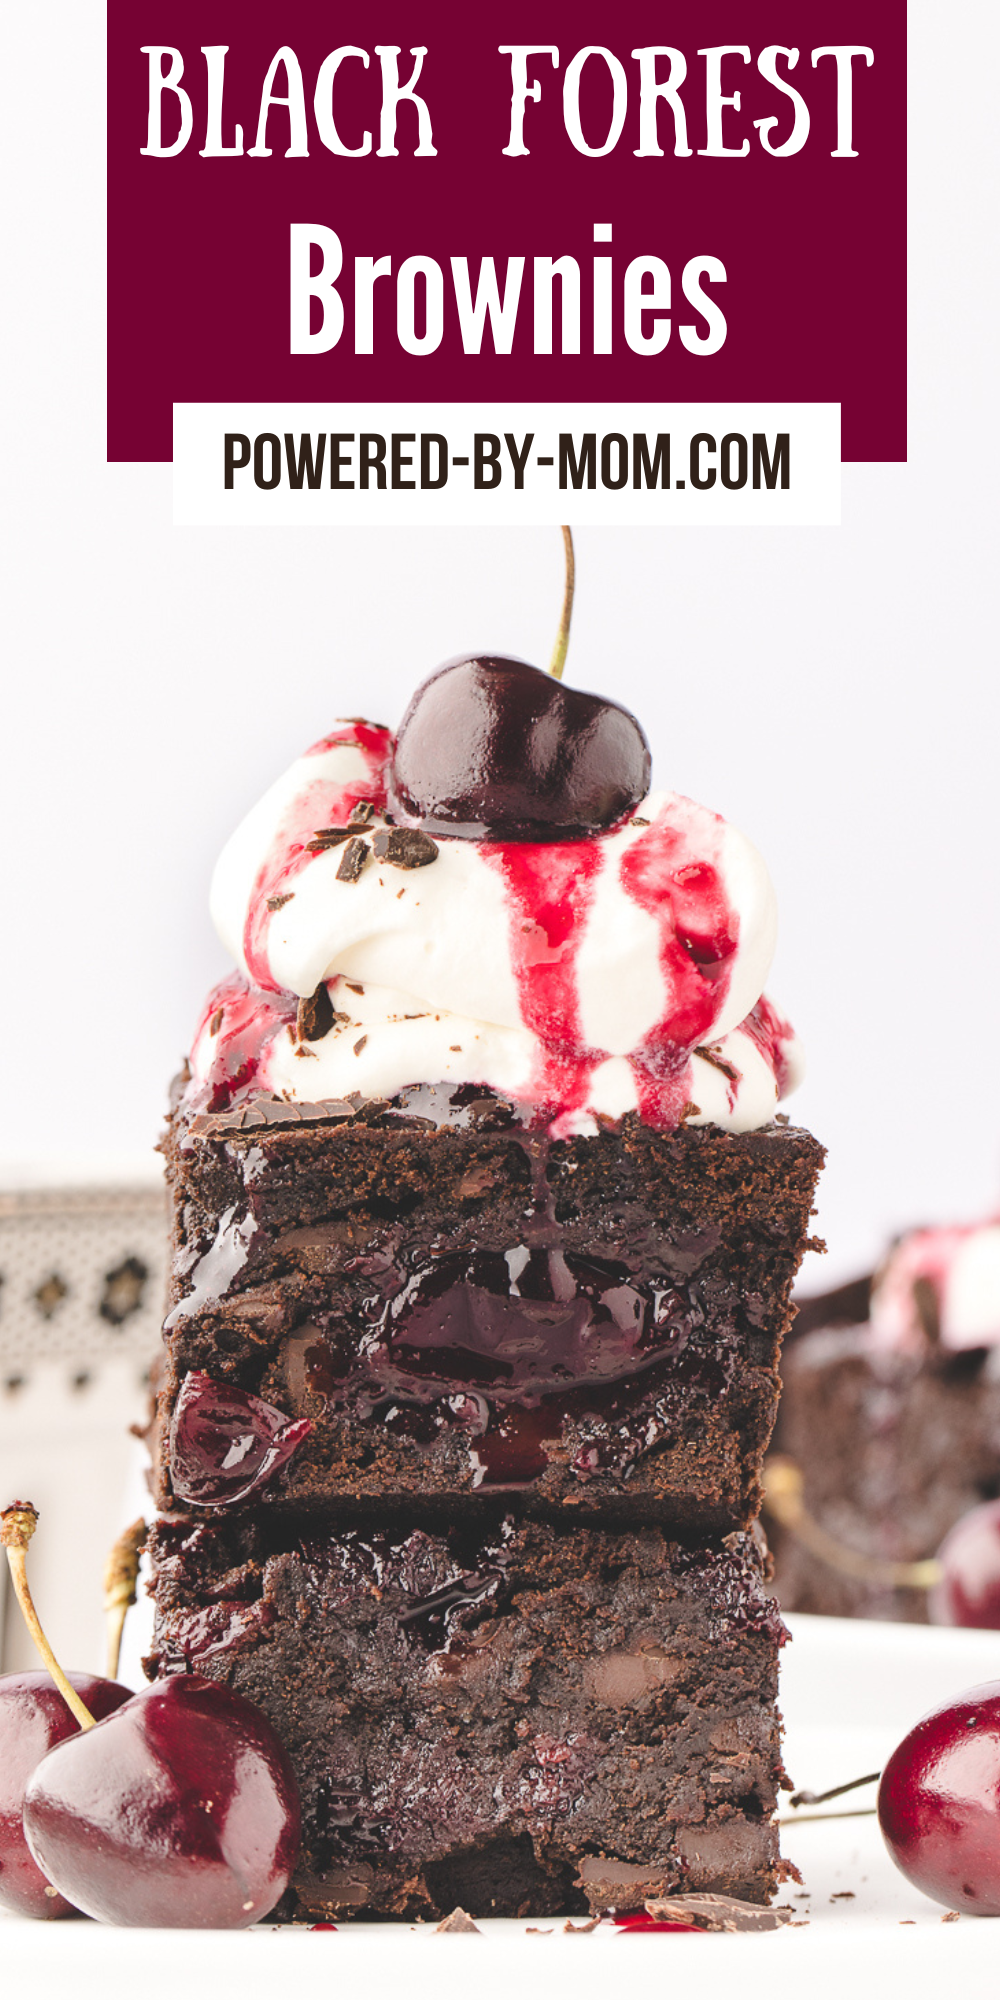 Do you love Black forest cake? You'll love these easier to make Black forest brownies are a scrumptious combination of whipped cream, cherries and chocolate. The decadent brownies are made from scratch and when paired with the cherry filling and whipped cream it makes for a delicious fudgy black forest treat. 